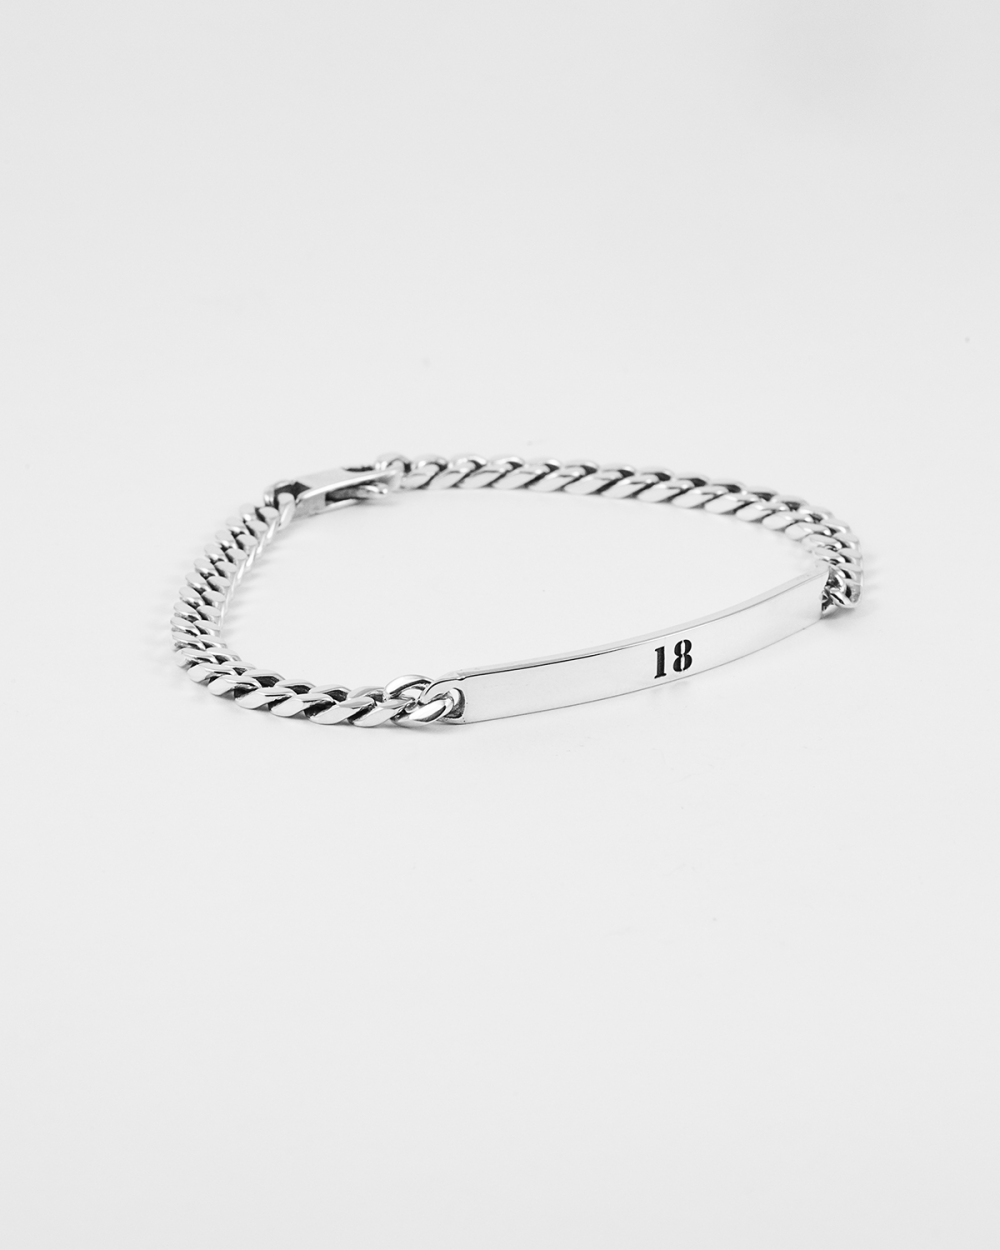 SQUARE CURB BRACELET 150 WITH PLATE